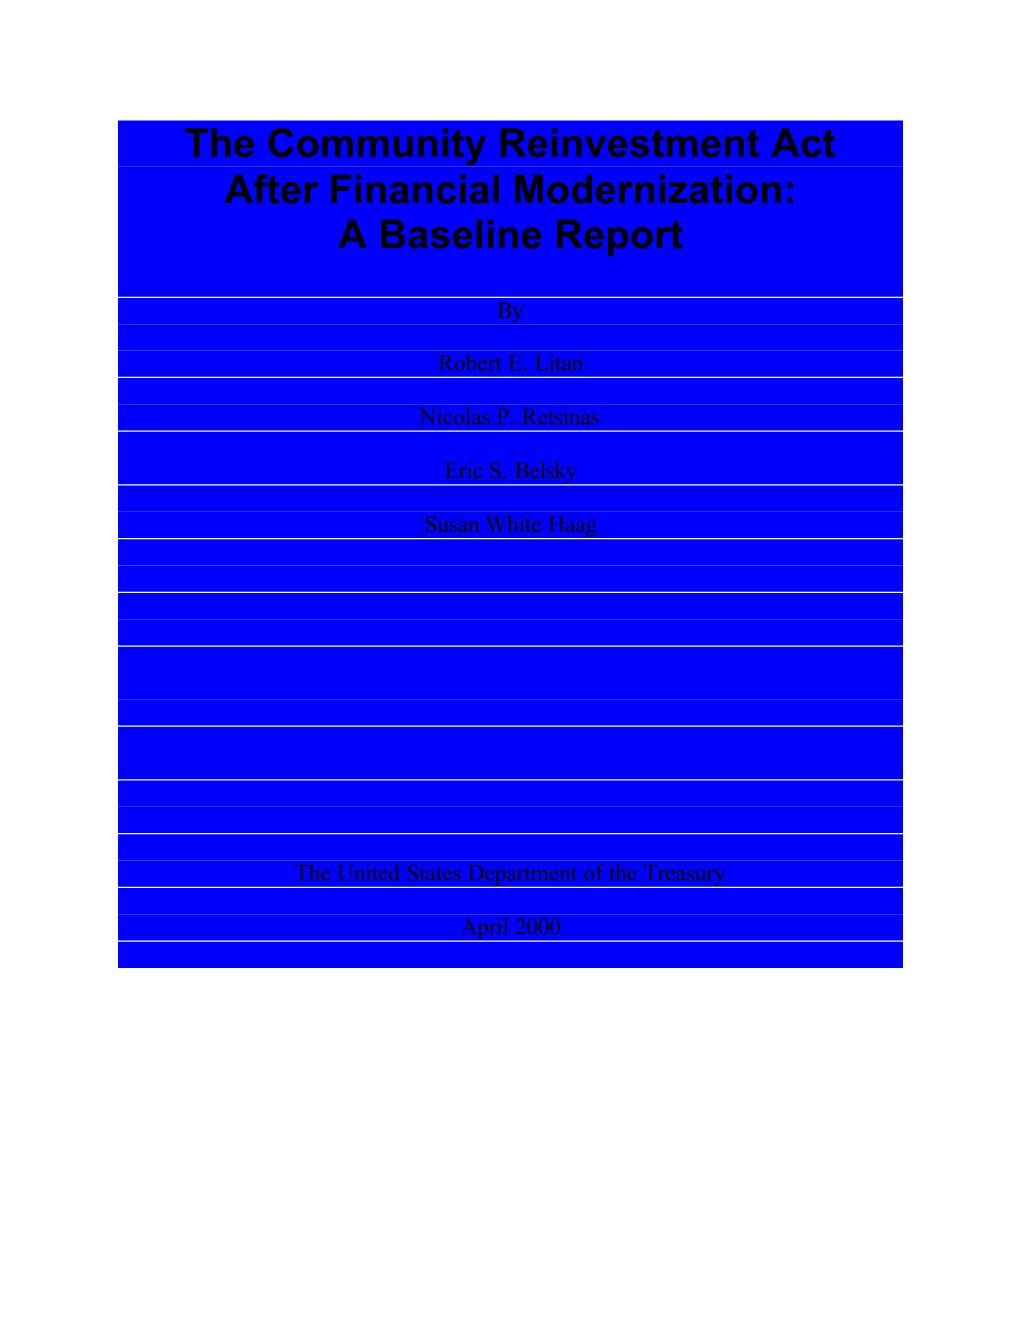 The Community Reinvestment Act After Financial Modernization: a Baseline Report